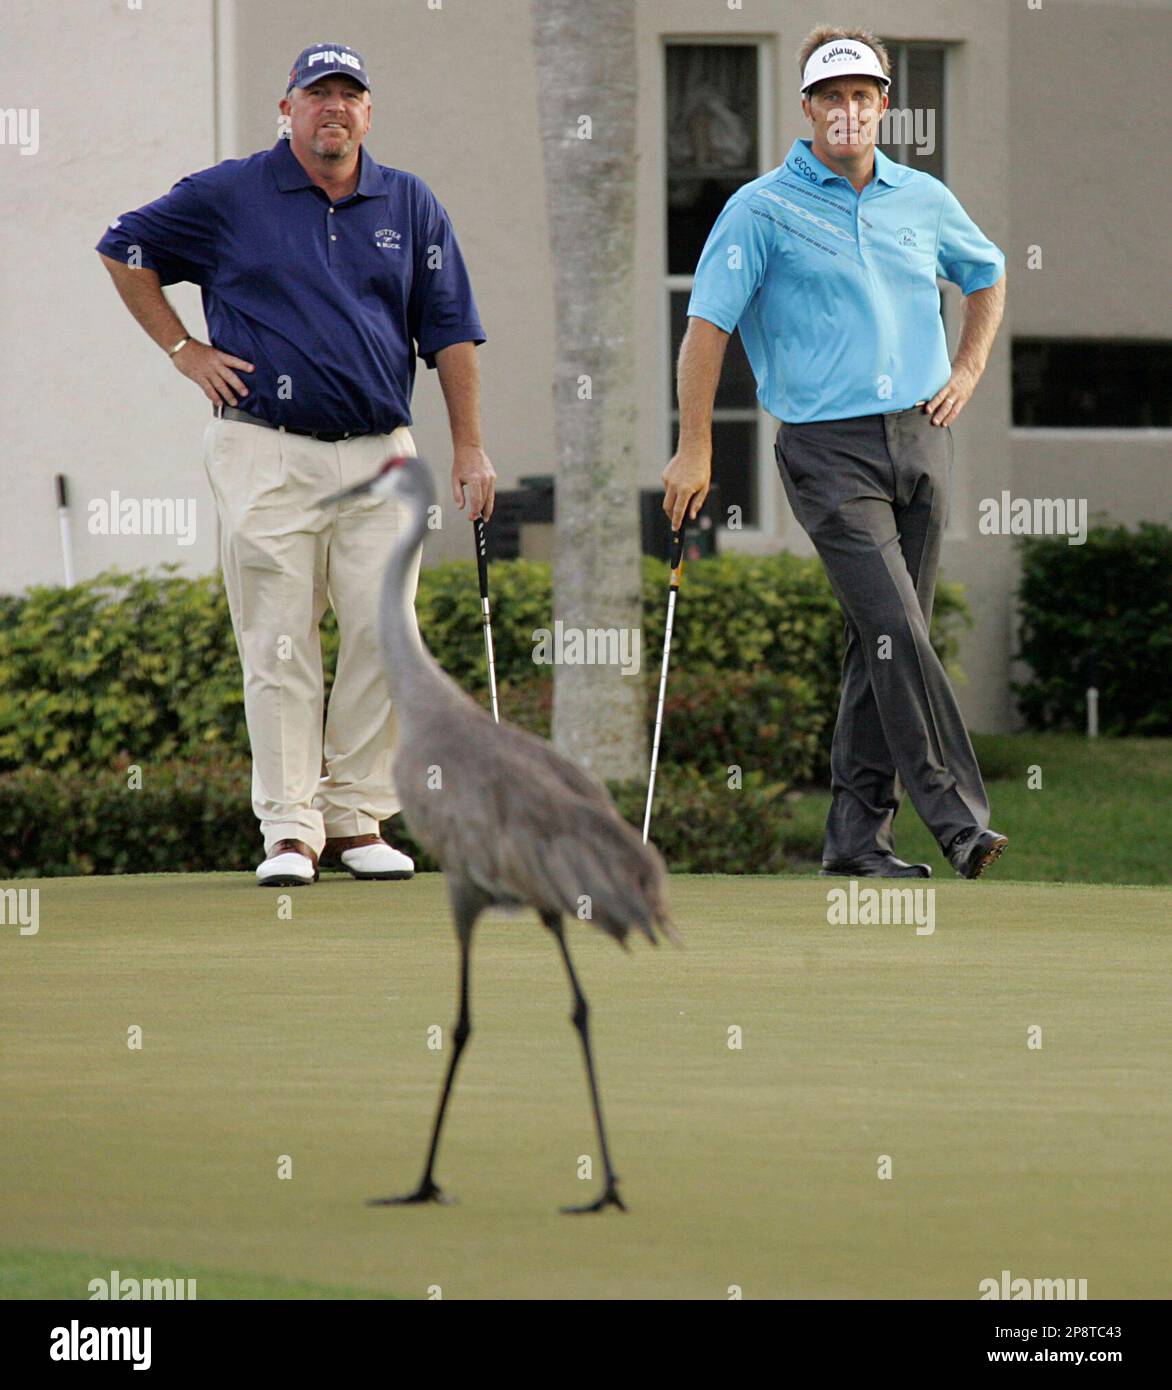 Mark Calcavecchia, left, and Stuart Appleby, from Australia, watch a crane walk across the 17th green during the first round of the Honda Classic golf tournament in Palm Beach Gardens, Fla., Thursday,